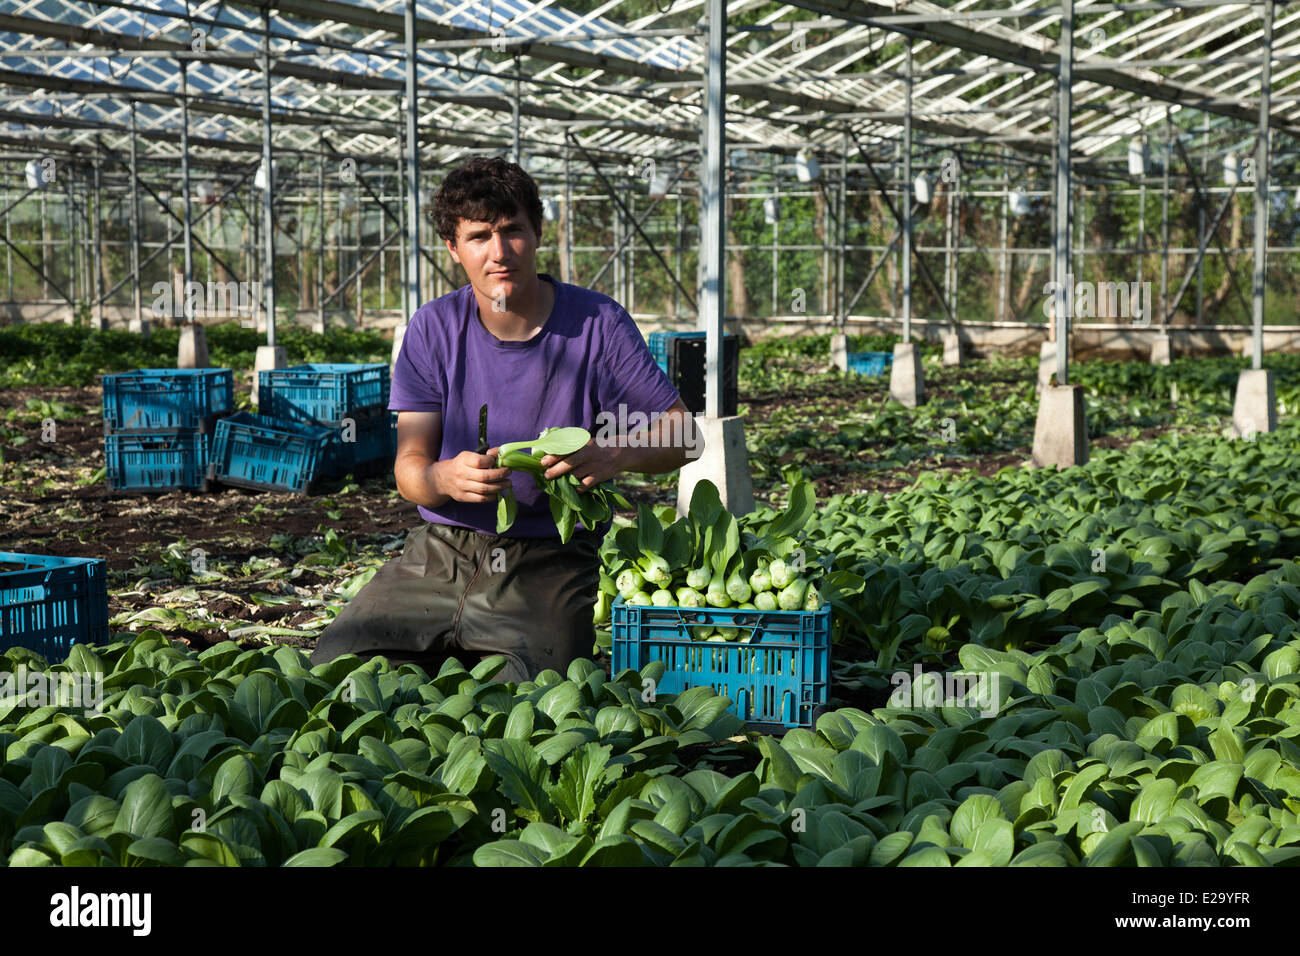 Tarleton, Preston, UK 18th June, 2014.  Paulo Rodrigues (MR) harvesting greenhouse salad crops in sweltering conditions. Portuguese migrant labourers picking the second crop of Tatsoi lettuce for market as the warm weather makes for a good growing season in this market gardening area.  Salad consumption is at its highest level in the history of eating and in summer months mean demand goes crazy, which is all good news for the regions salad bowl, the West Lancashire coastal plain between Preston and Southport where miles of rich, black soil provide an ideal growing medium. Stock Photo